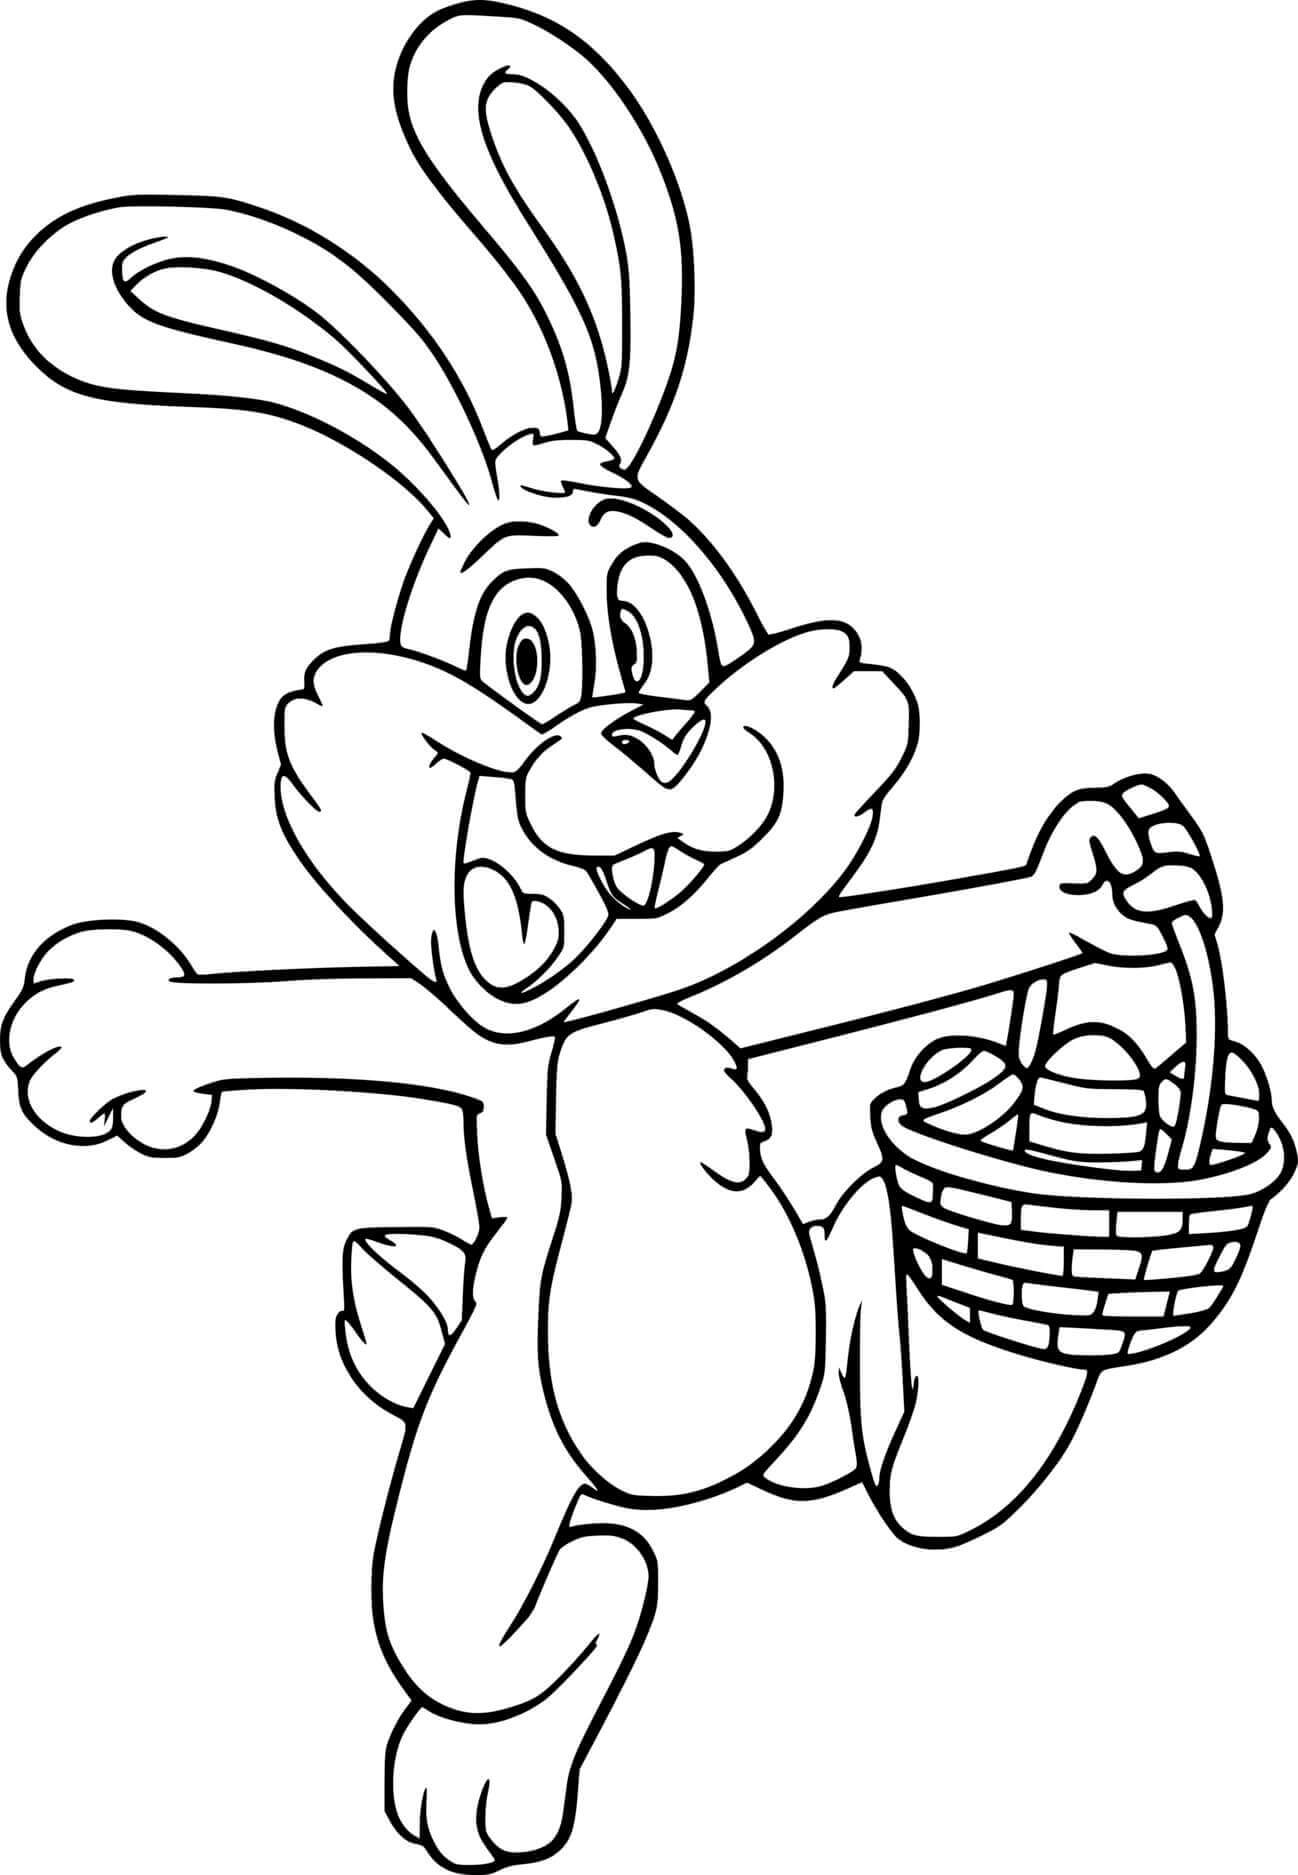 Running Easter Bunny Coloring Page